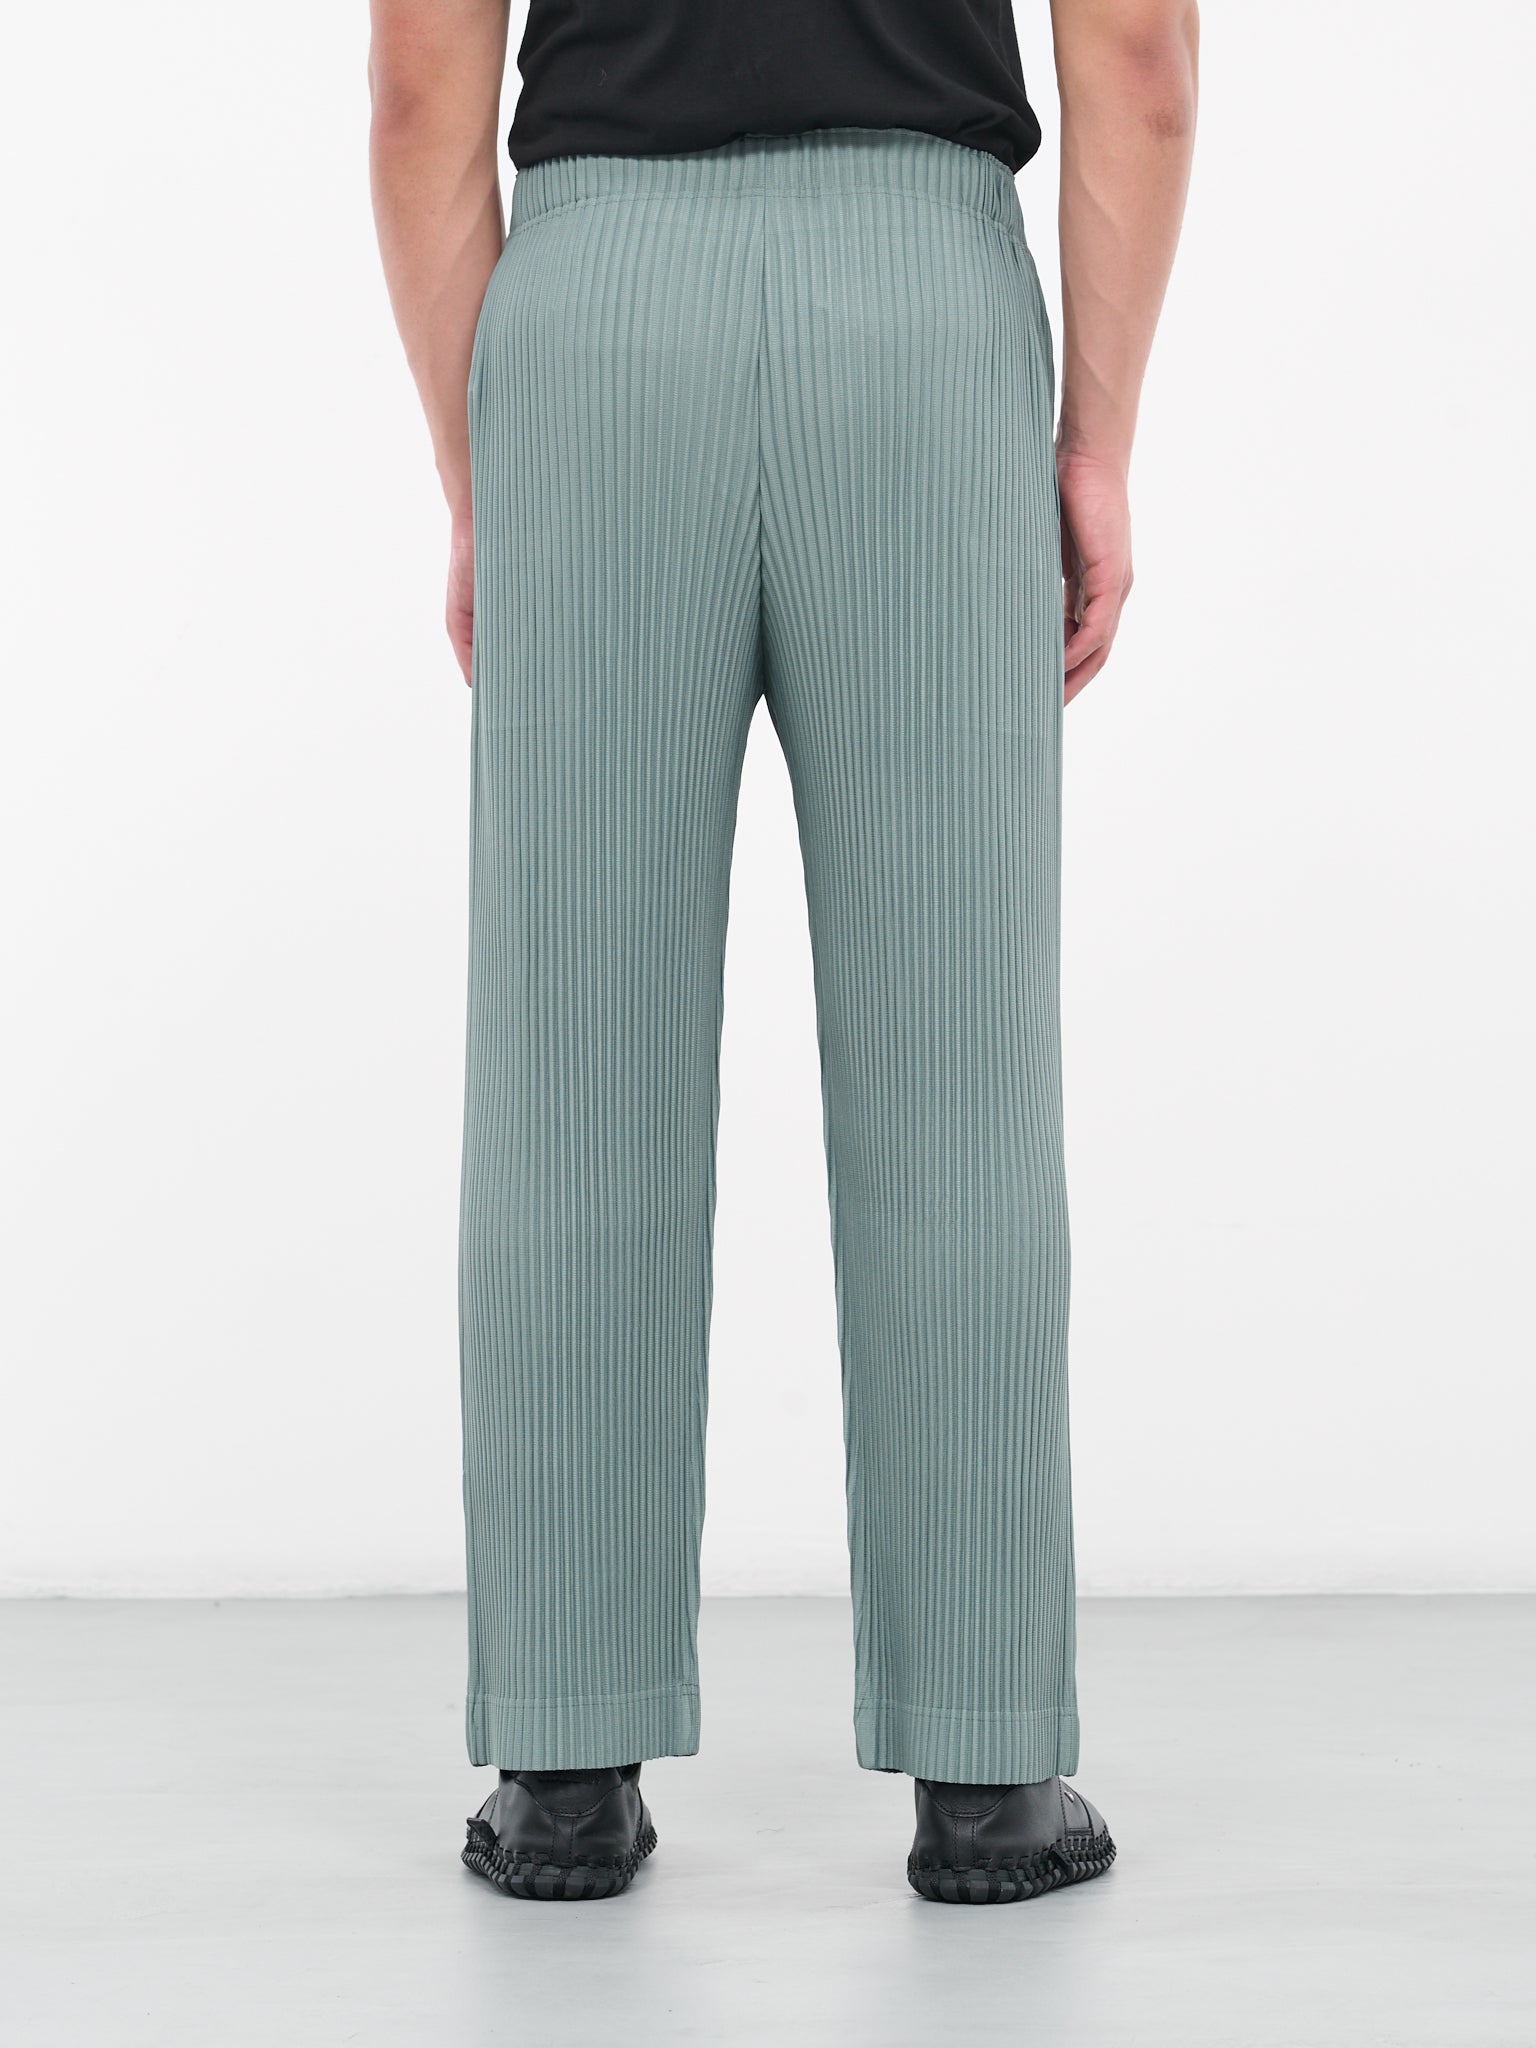 August Trousers (HP38JF109-16-MINT-GRAY)